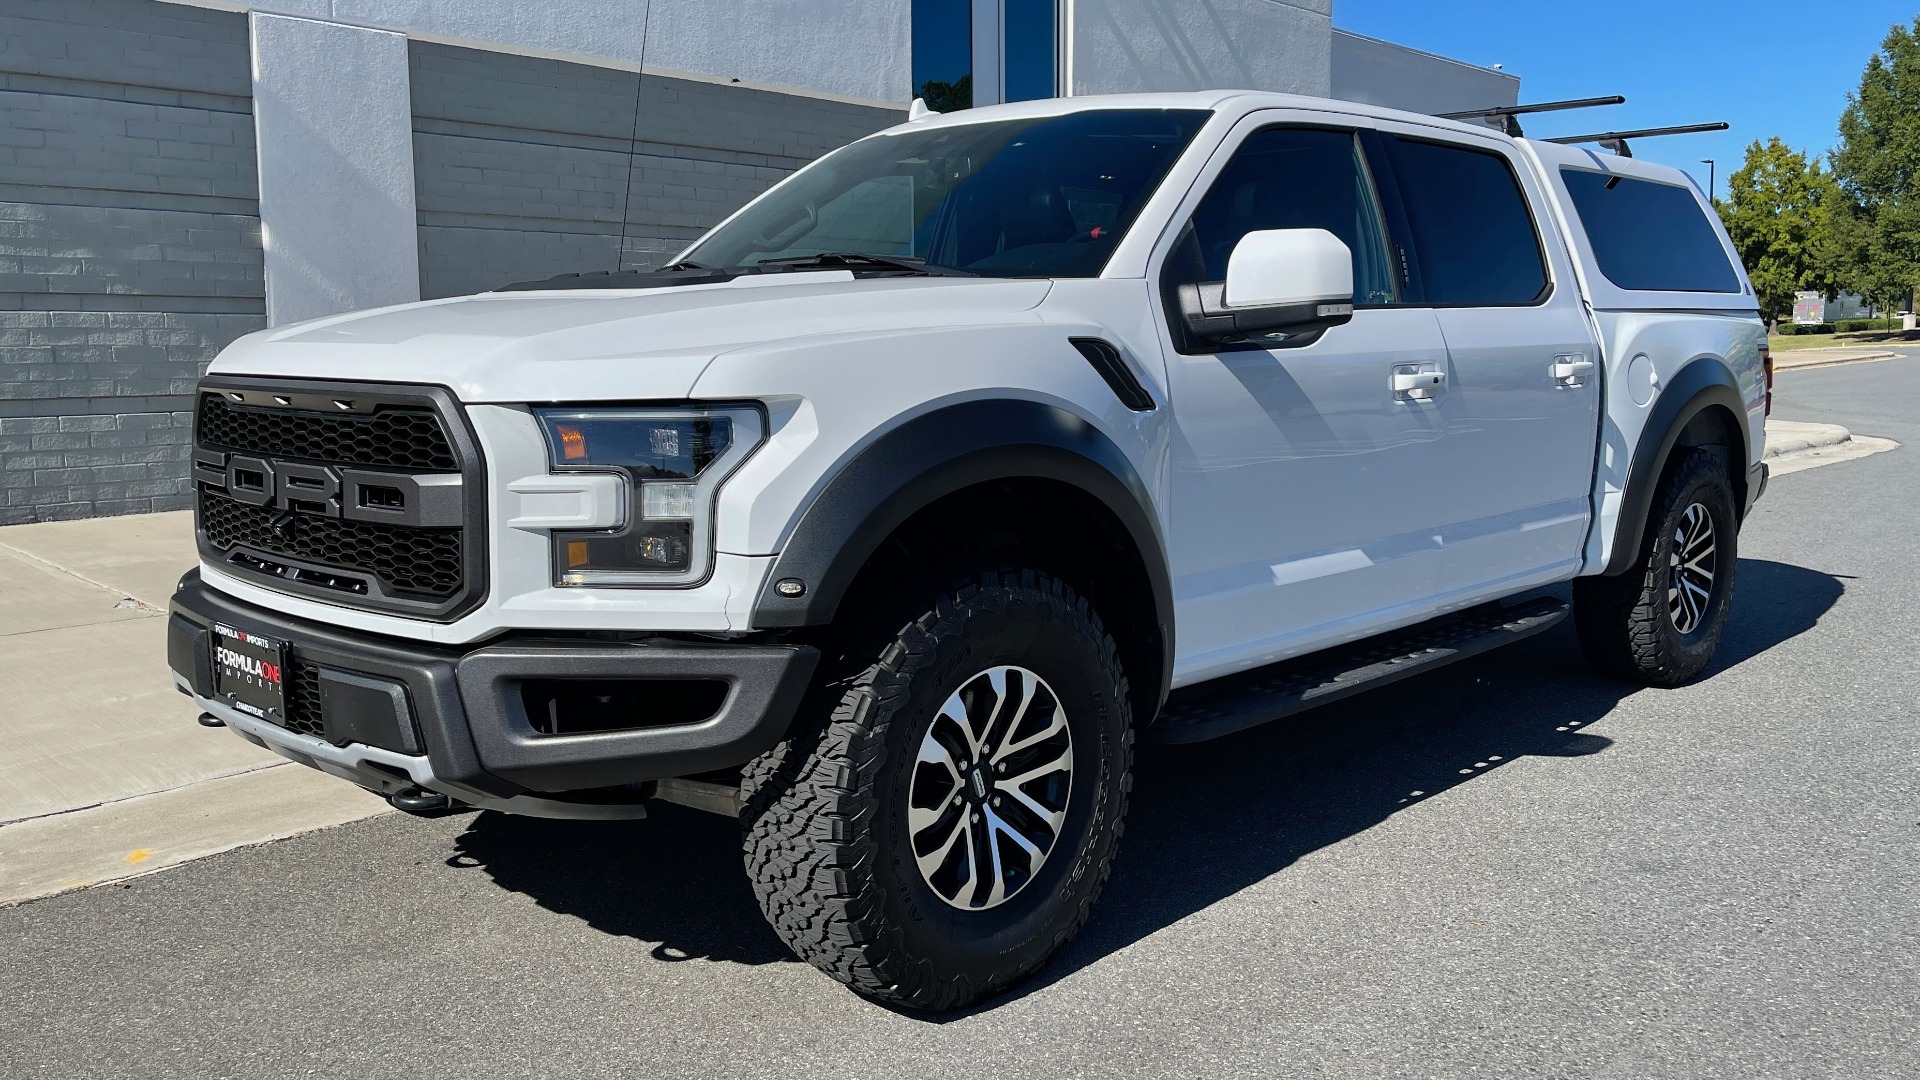 Used 2019 Ford F-150 RAPTOR 4X4 SUPERCREW / NAV / BLIS / B&O SND / REMOTE START / REARVIEW for sale Sold at Formula Imports in Charlotte NC 28227 3